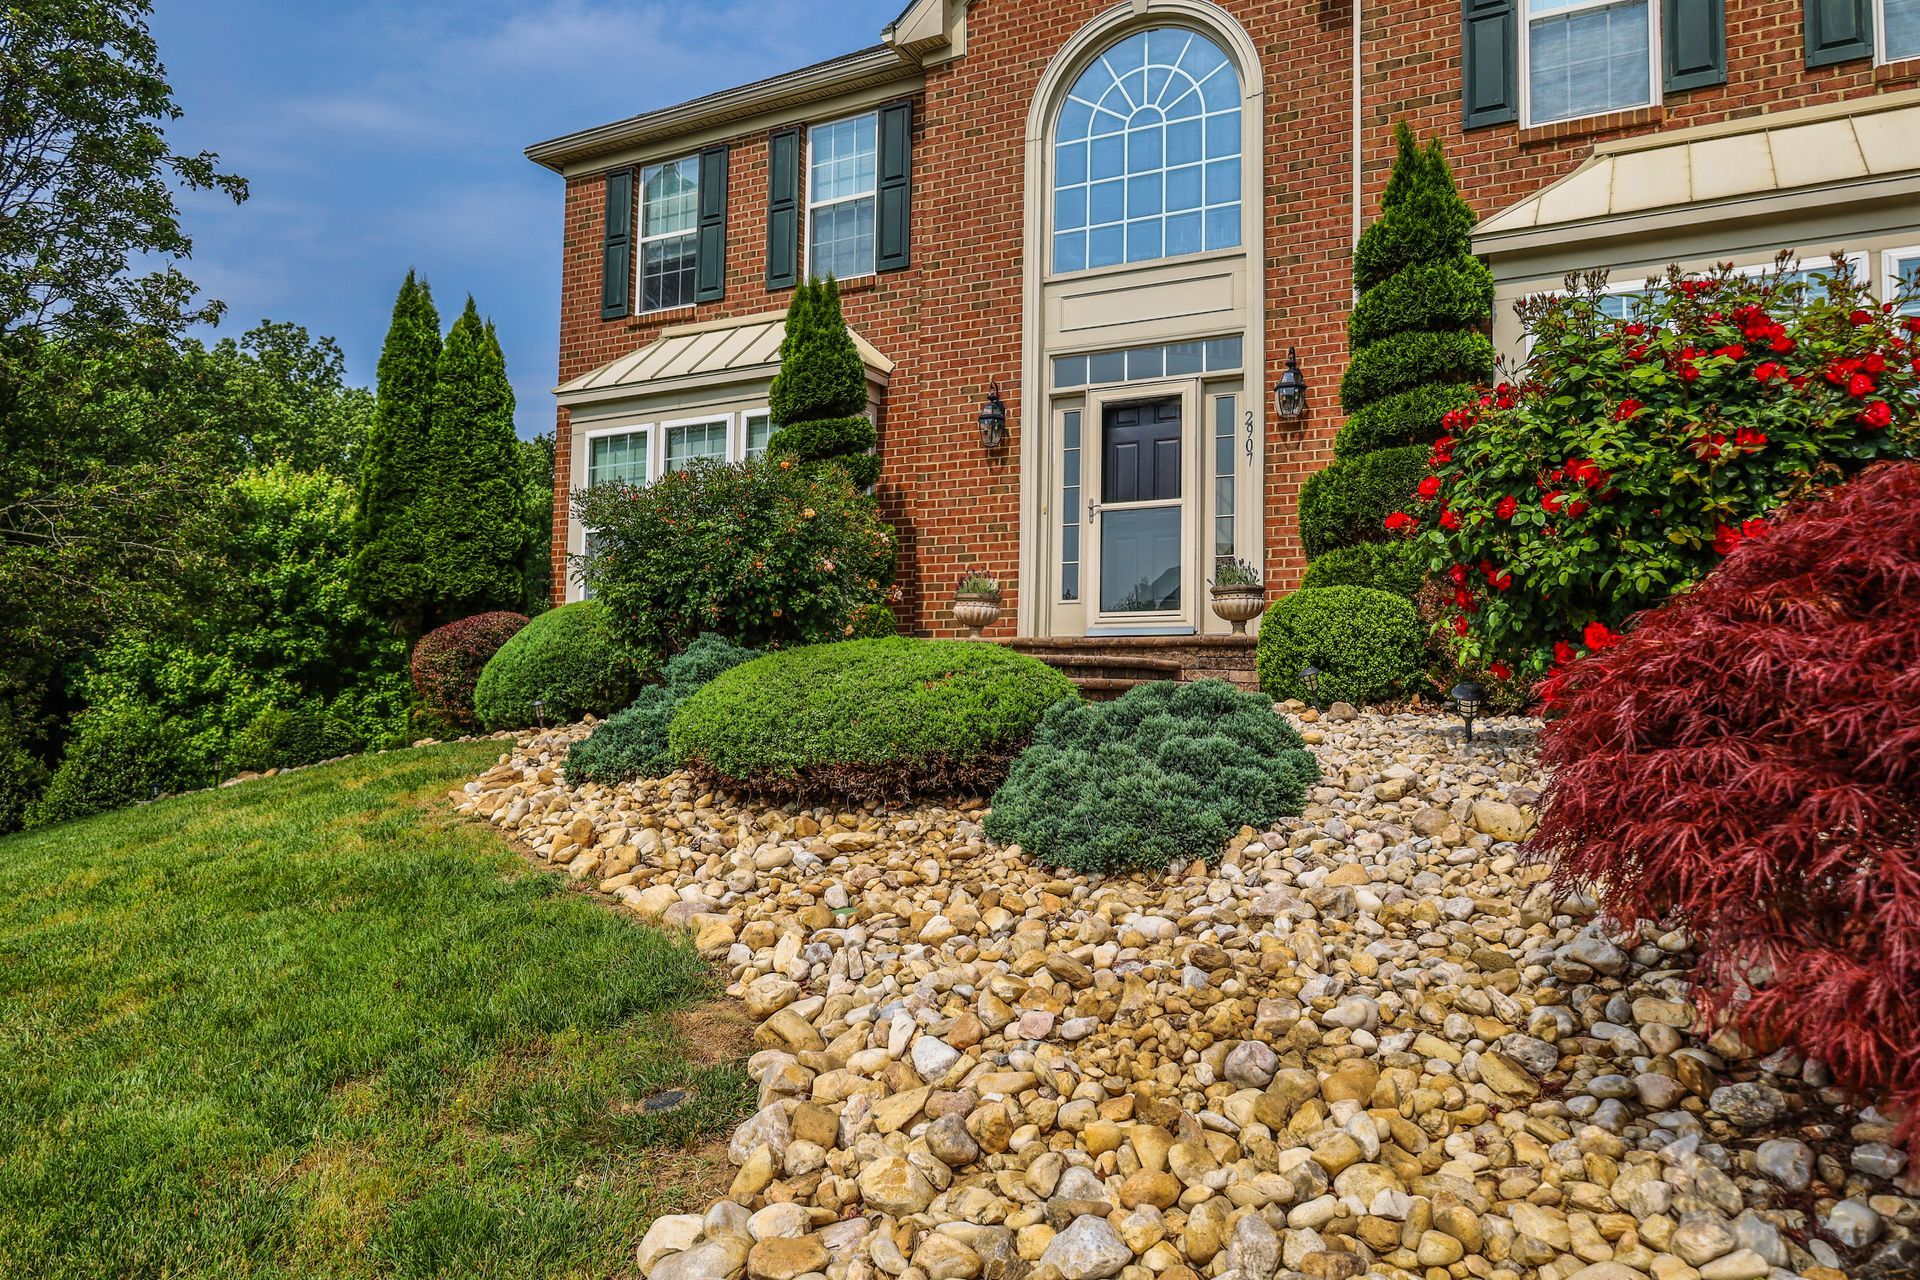 Landscaping with rocks installation in Delaware